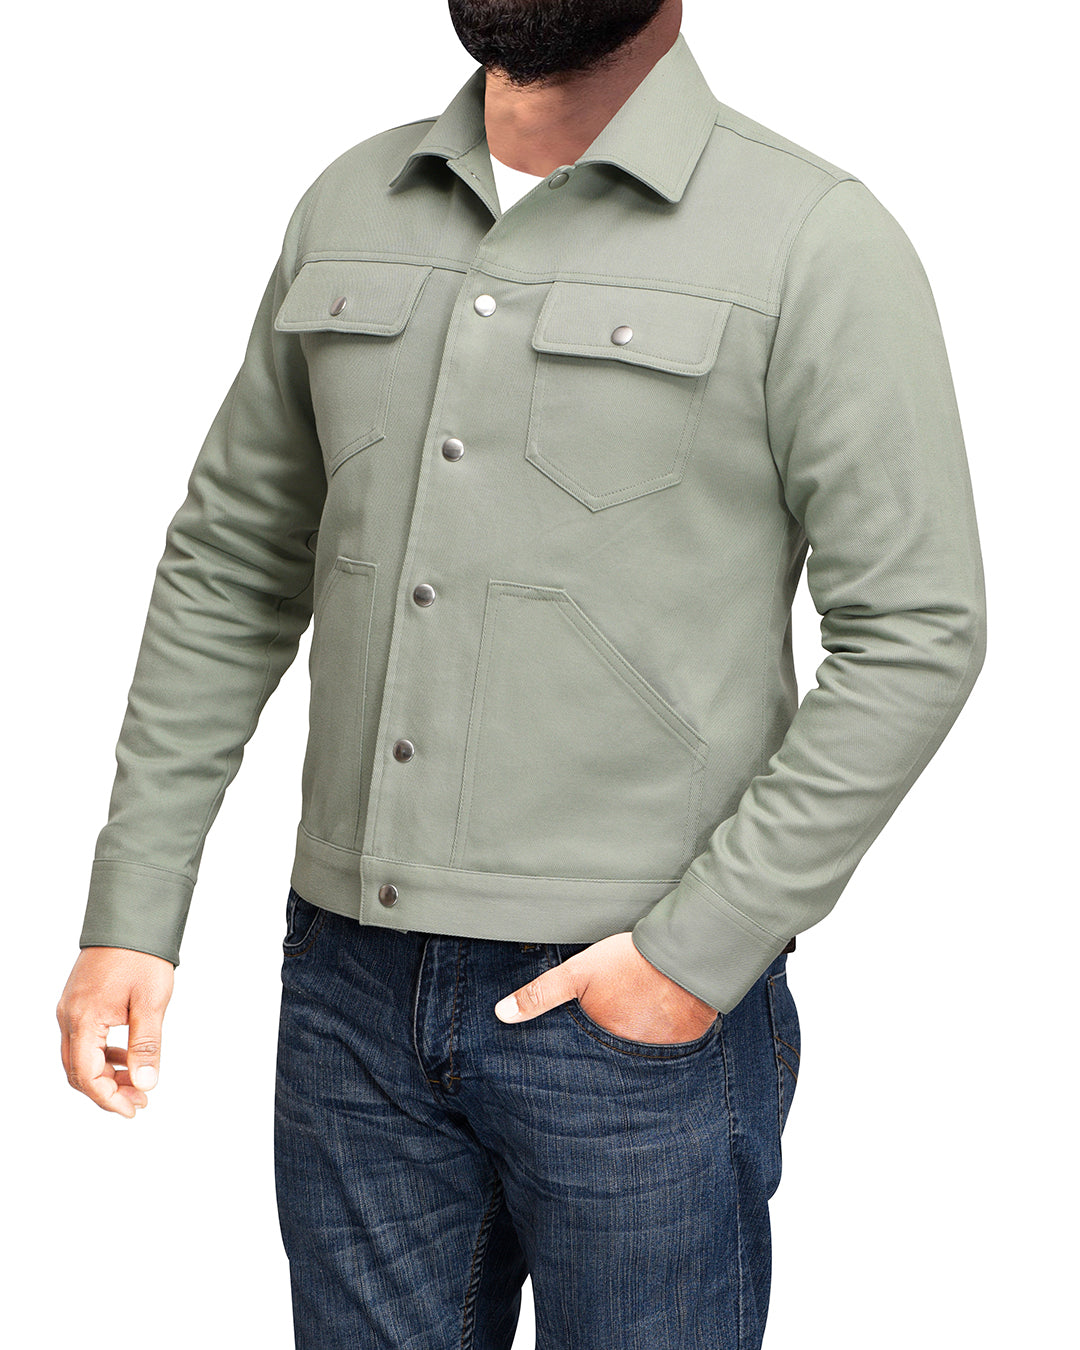 Front of model wearing the twill shirt jacket for men by Luxire in green one hand in pocket